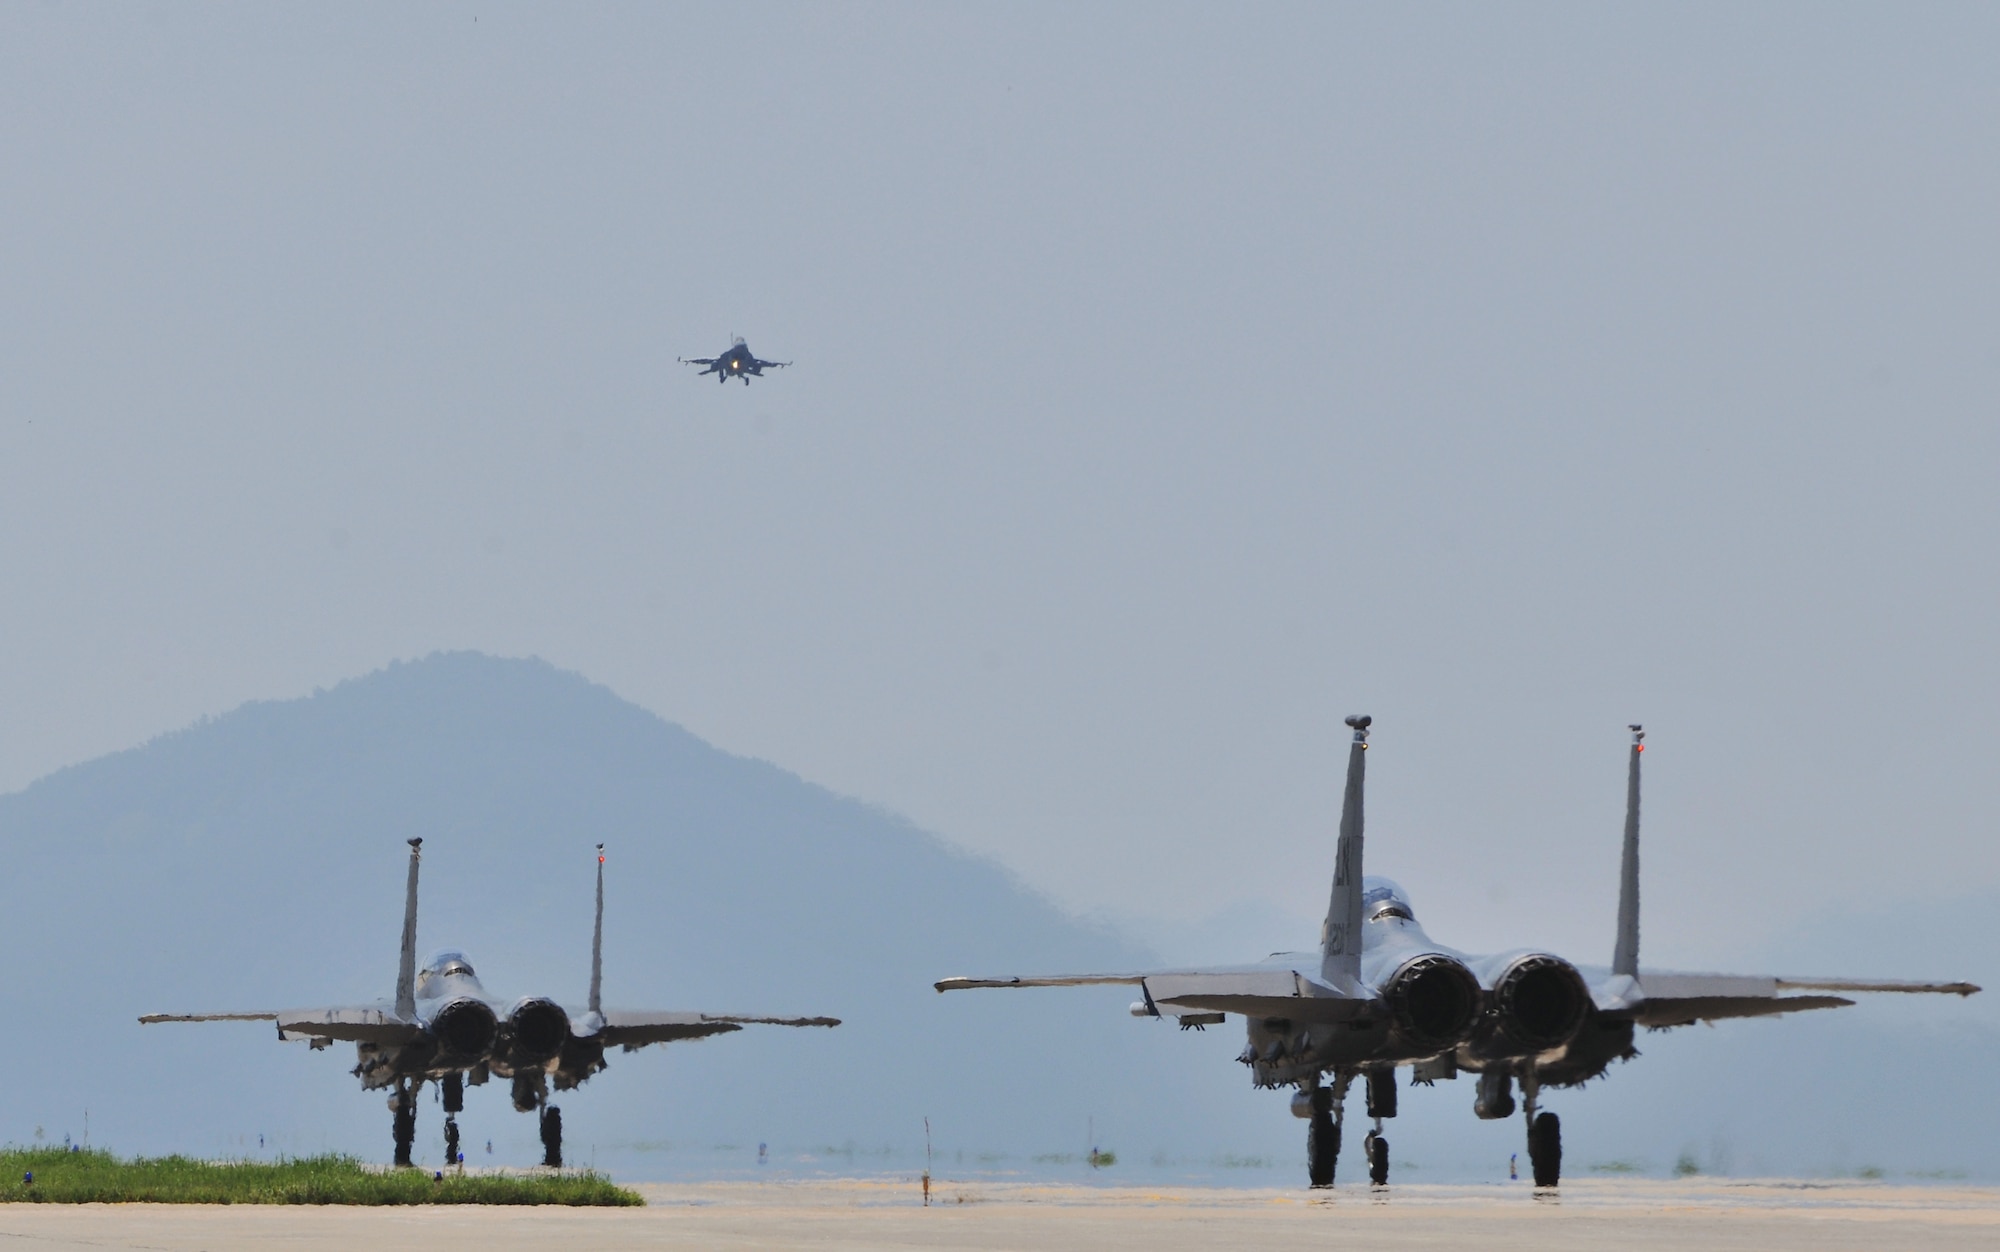 KUNSAN AIR BASE, Republic of Korea -- Two F-15E Eagle Strike taxi down the flightline here Aug. 5. Army and Air Force units teamed up for a joint training exercise at Jikdo Island, firing AGM-114 Hellfire missiles, rockets and 30mm munitions at the range. (U.S. Air Force photo/Senior Airman Brittany Y. Bateman)